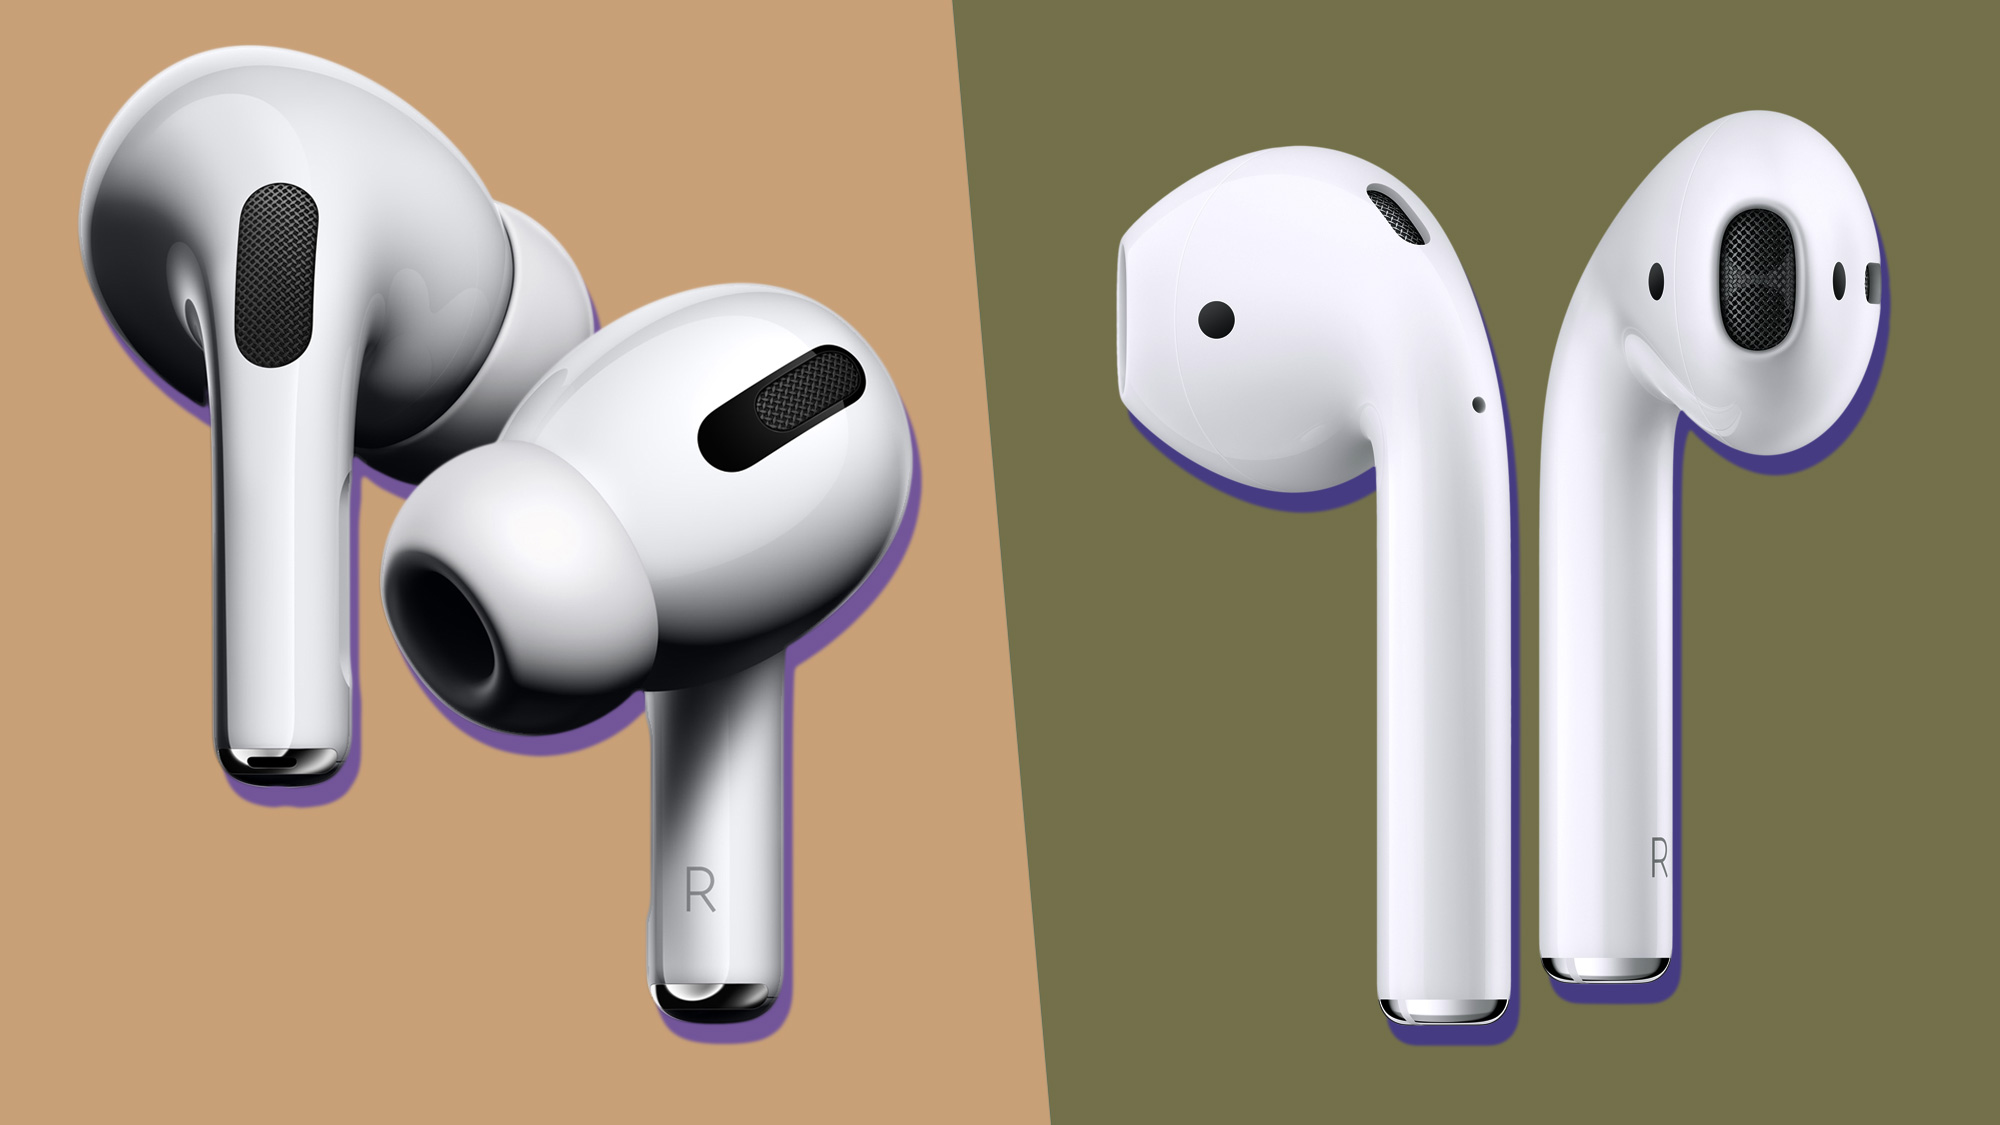 Apple AirPods (2019) vs AirPods Pro 2: which wireless earbuds are